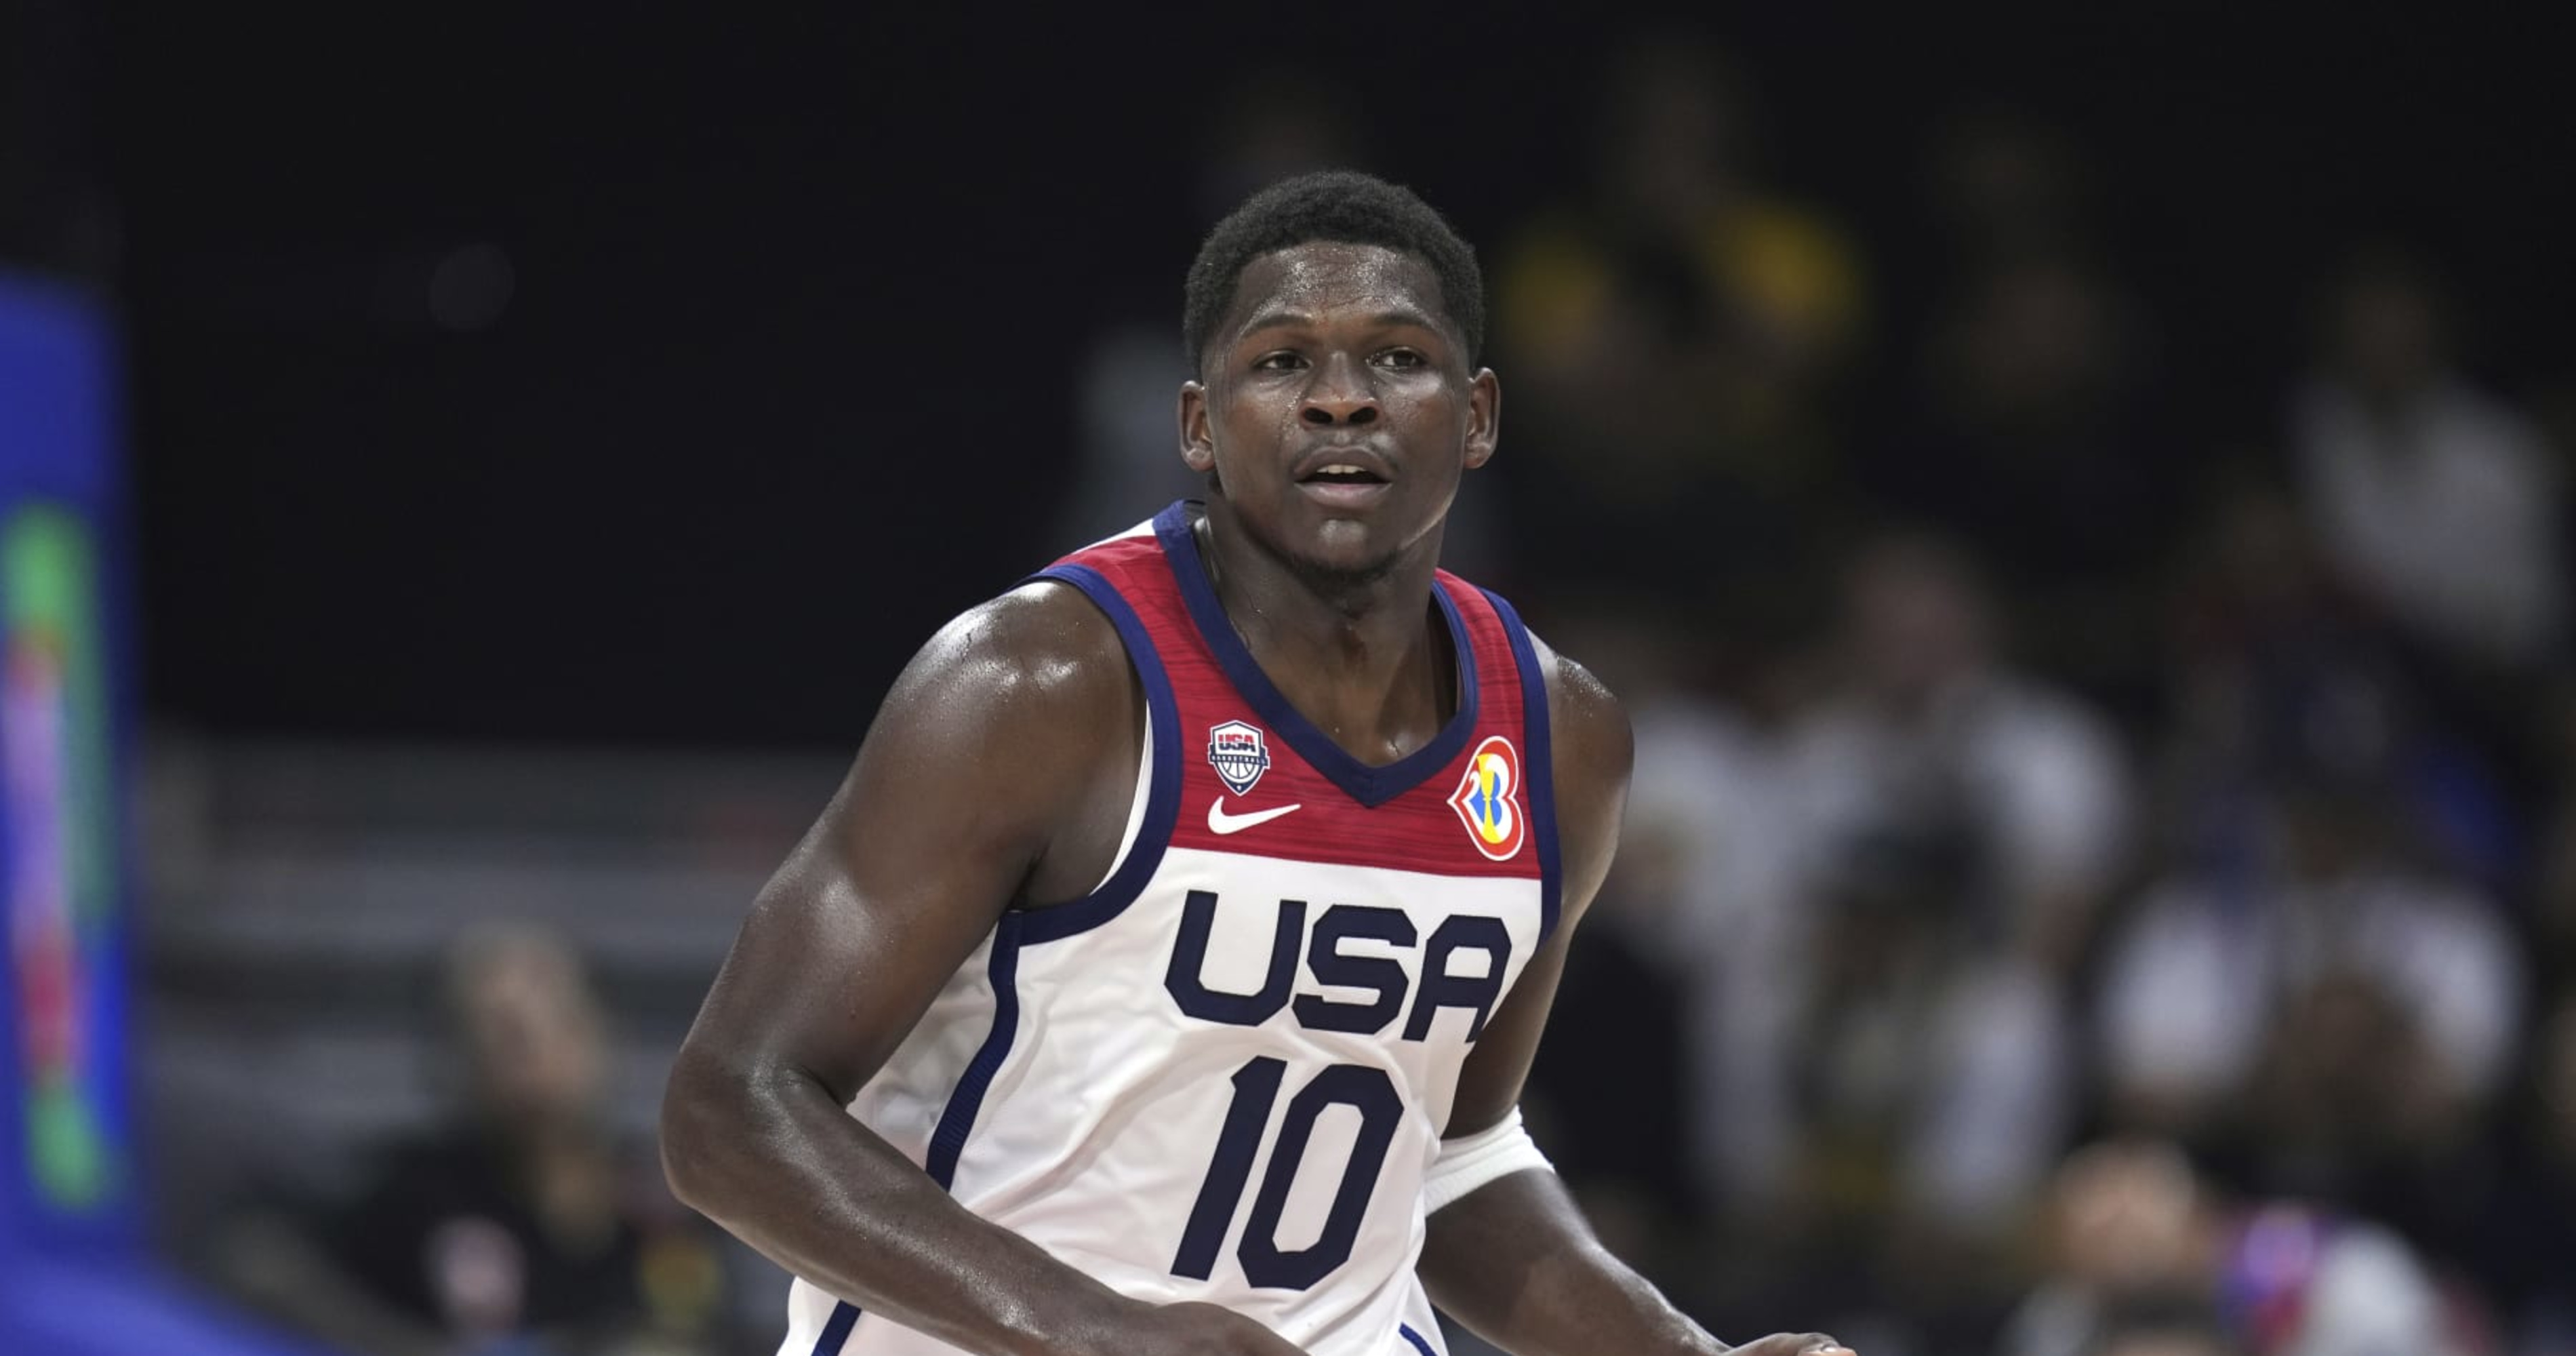 Anthony Edwards Gets Superstar Hype from Fans as Team USA Advances in